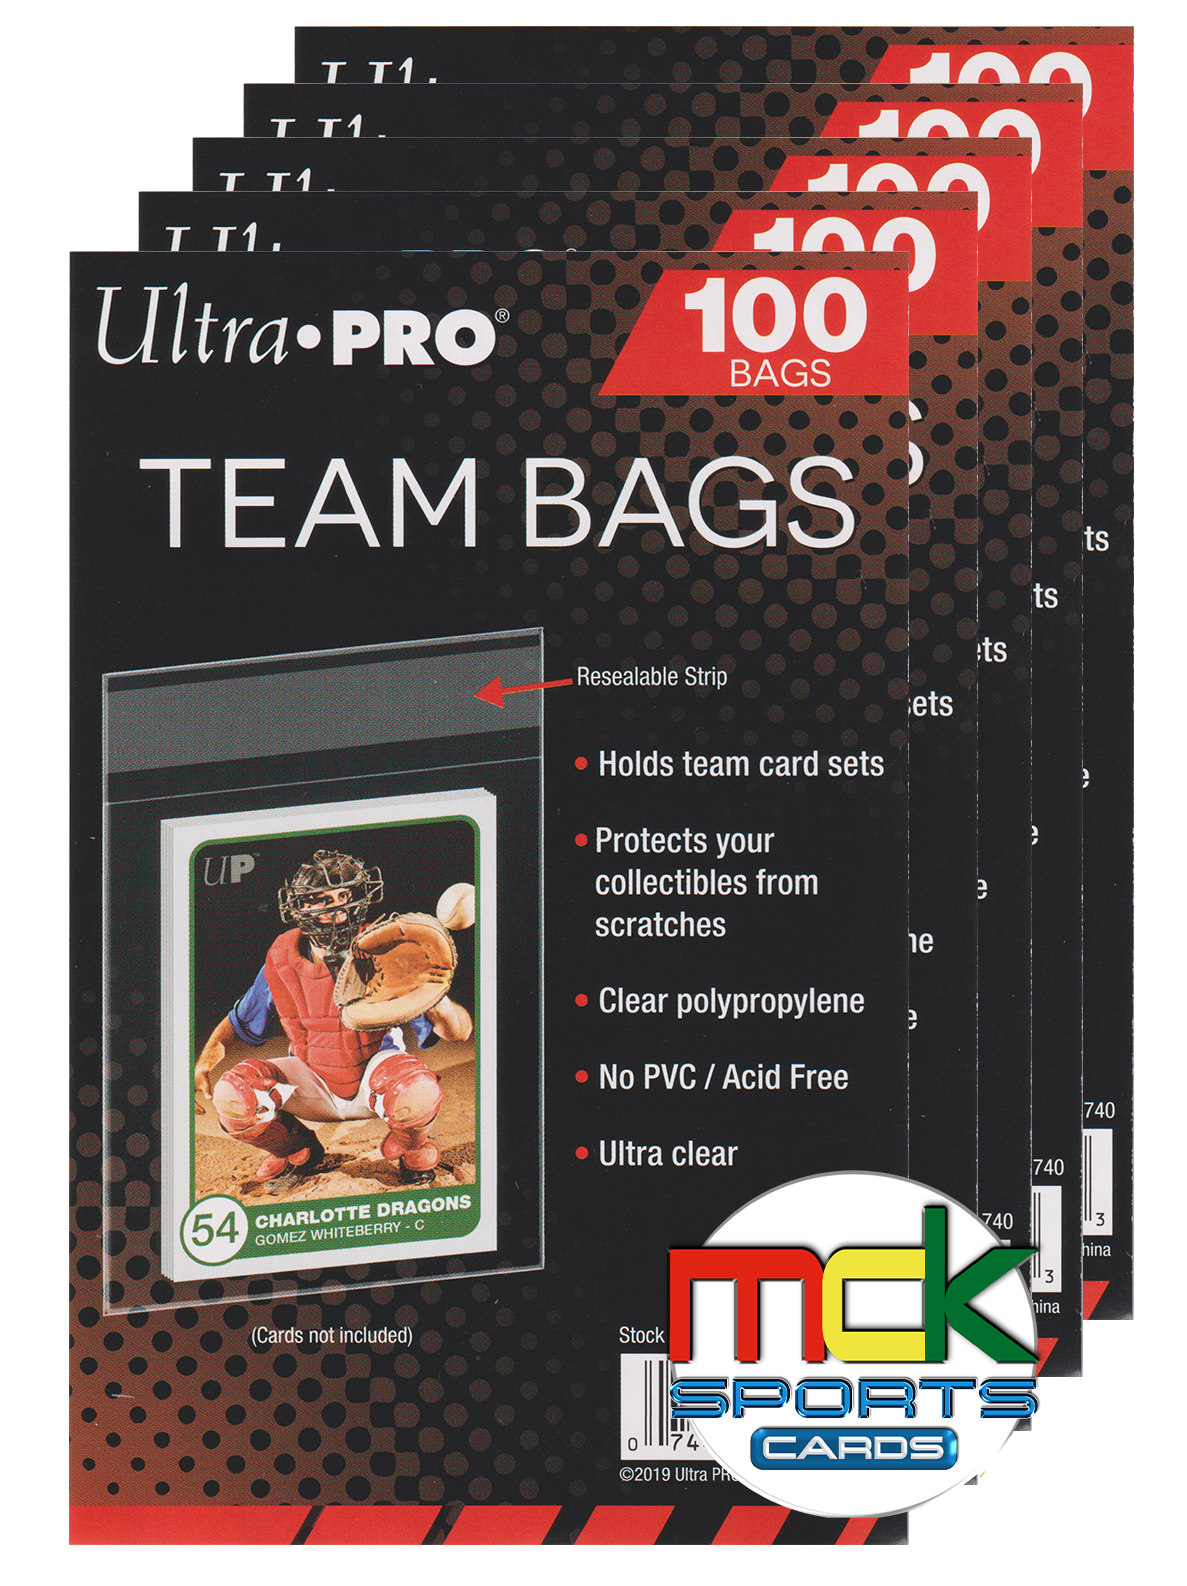 Ultra Pro Team Bag - Premium Soft Sleeve - Resealable, 500 Count, 5 Packs of 100